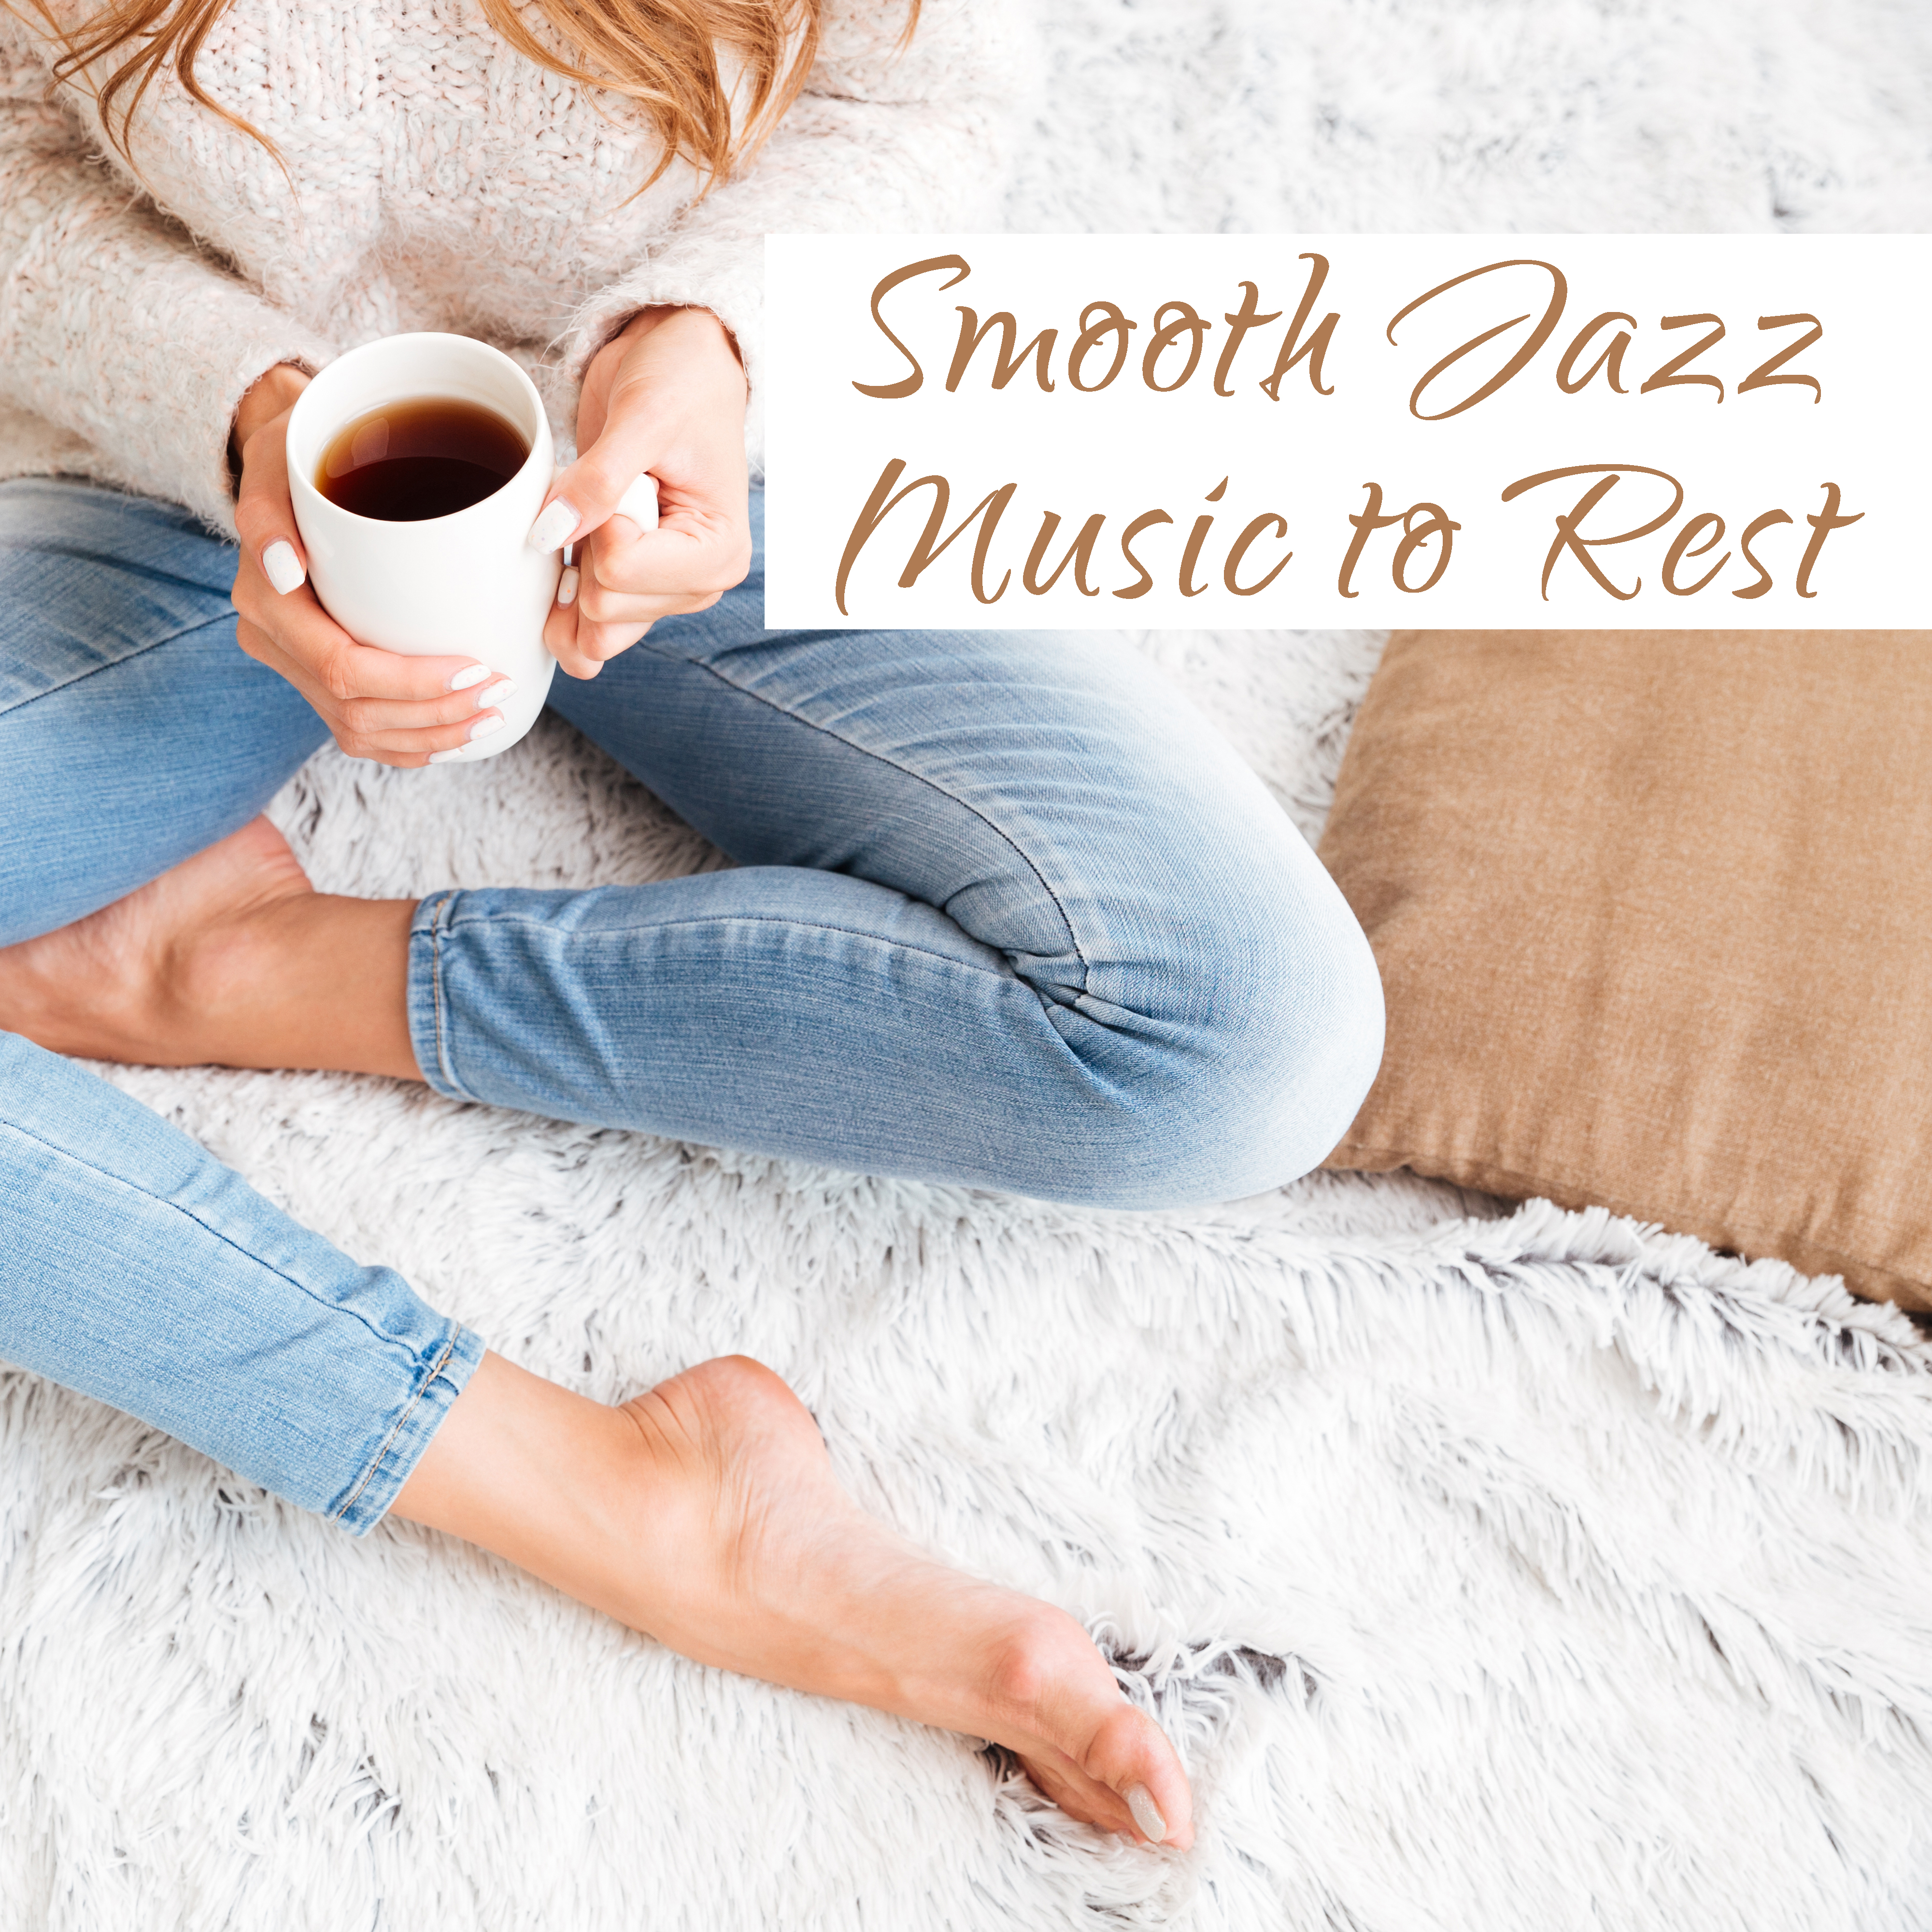 Smooth Jazz Music to Rest – Easy Listening, Piano Bar, Moonlight Jazz, Soothing Melodies